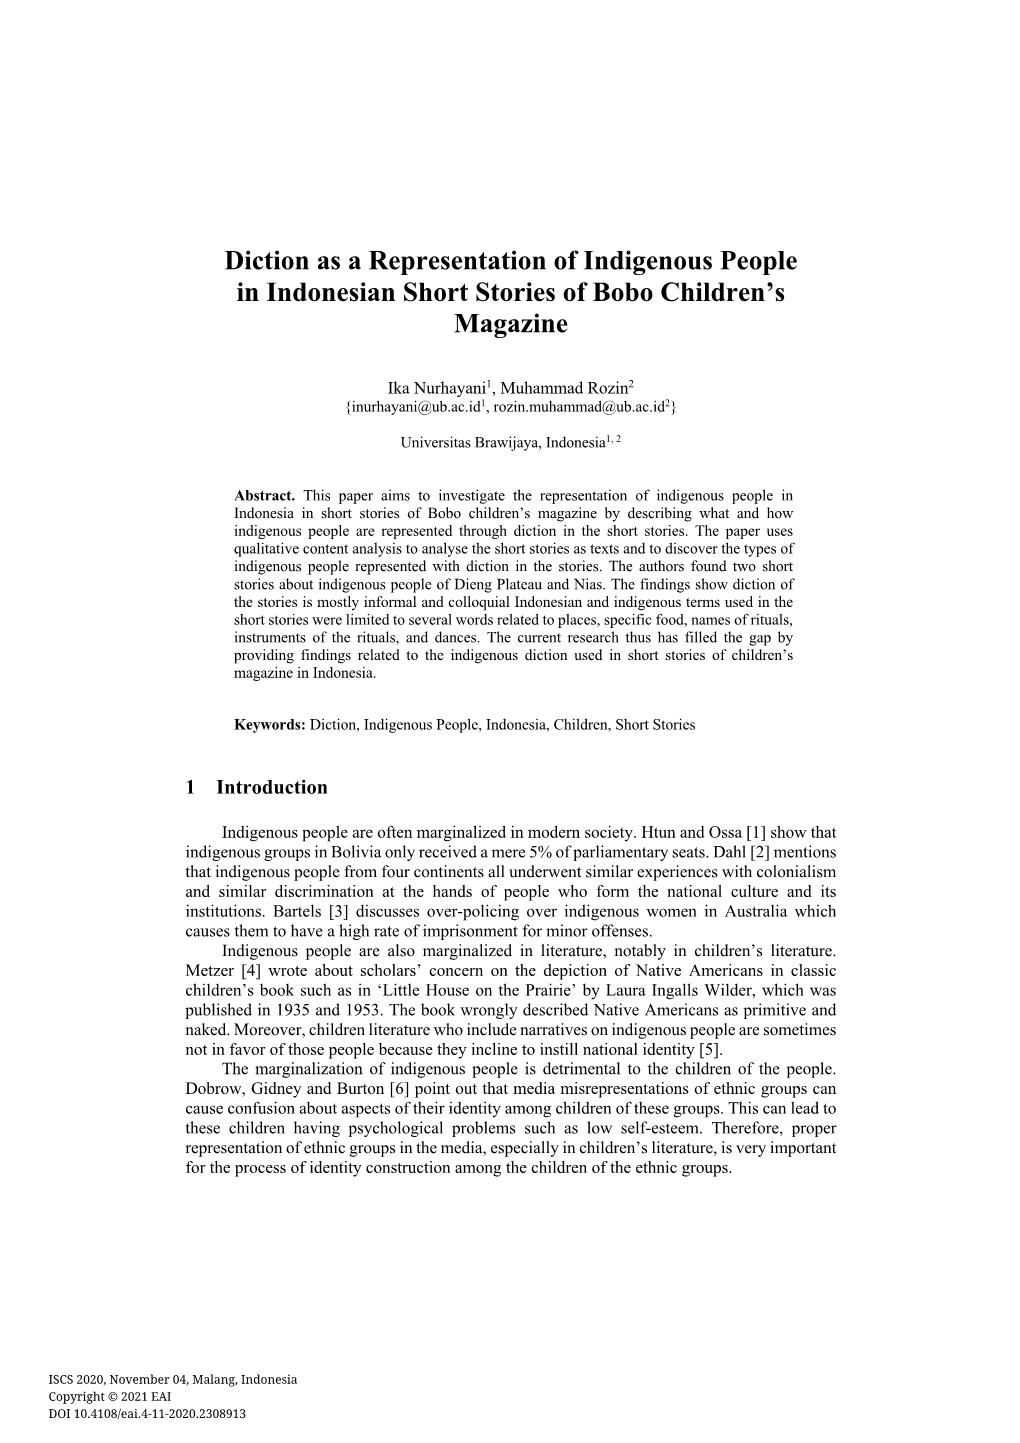 Diction As a Representation of Indigenous People in Indonesian Short Stories of Bobo Children's Magazine